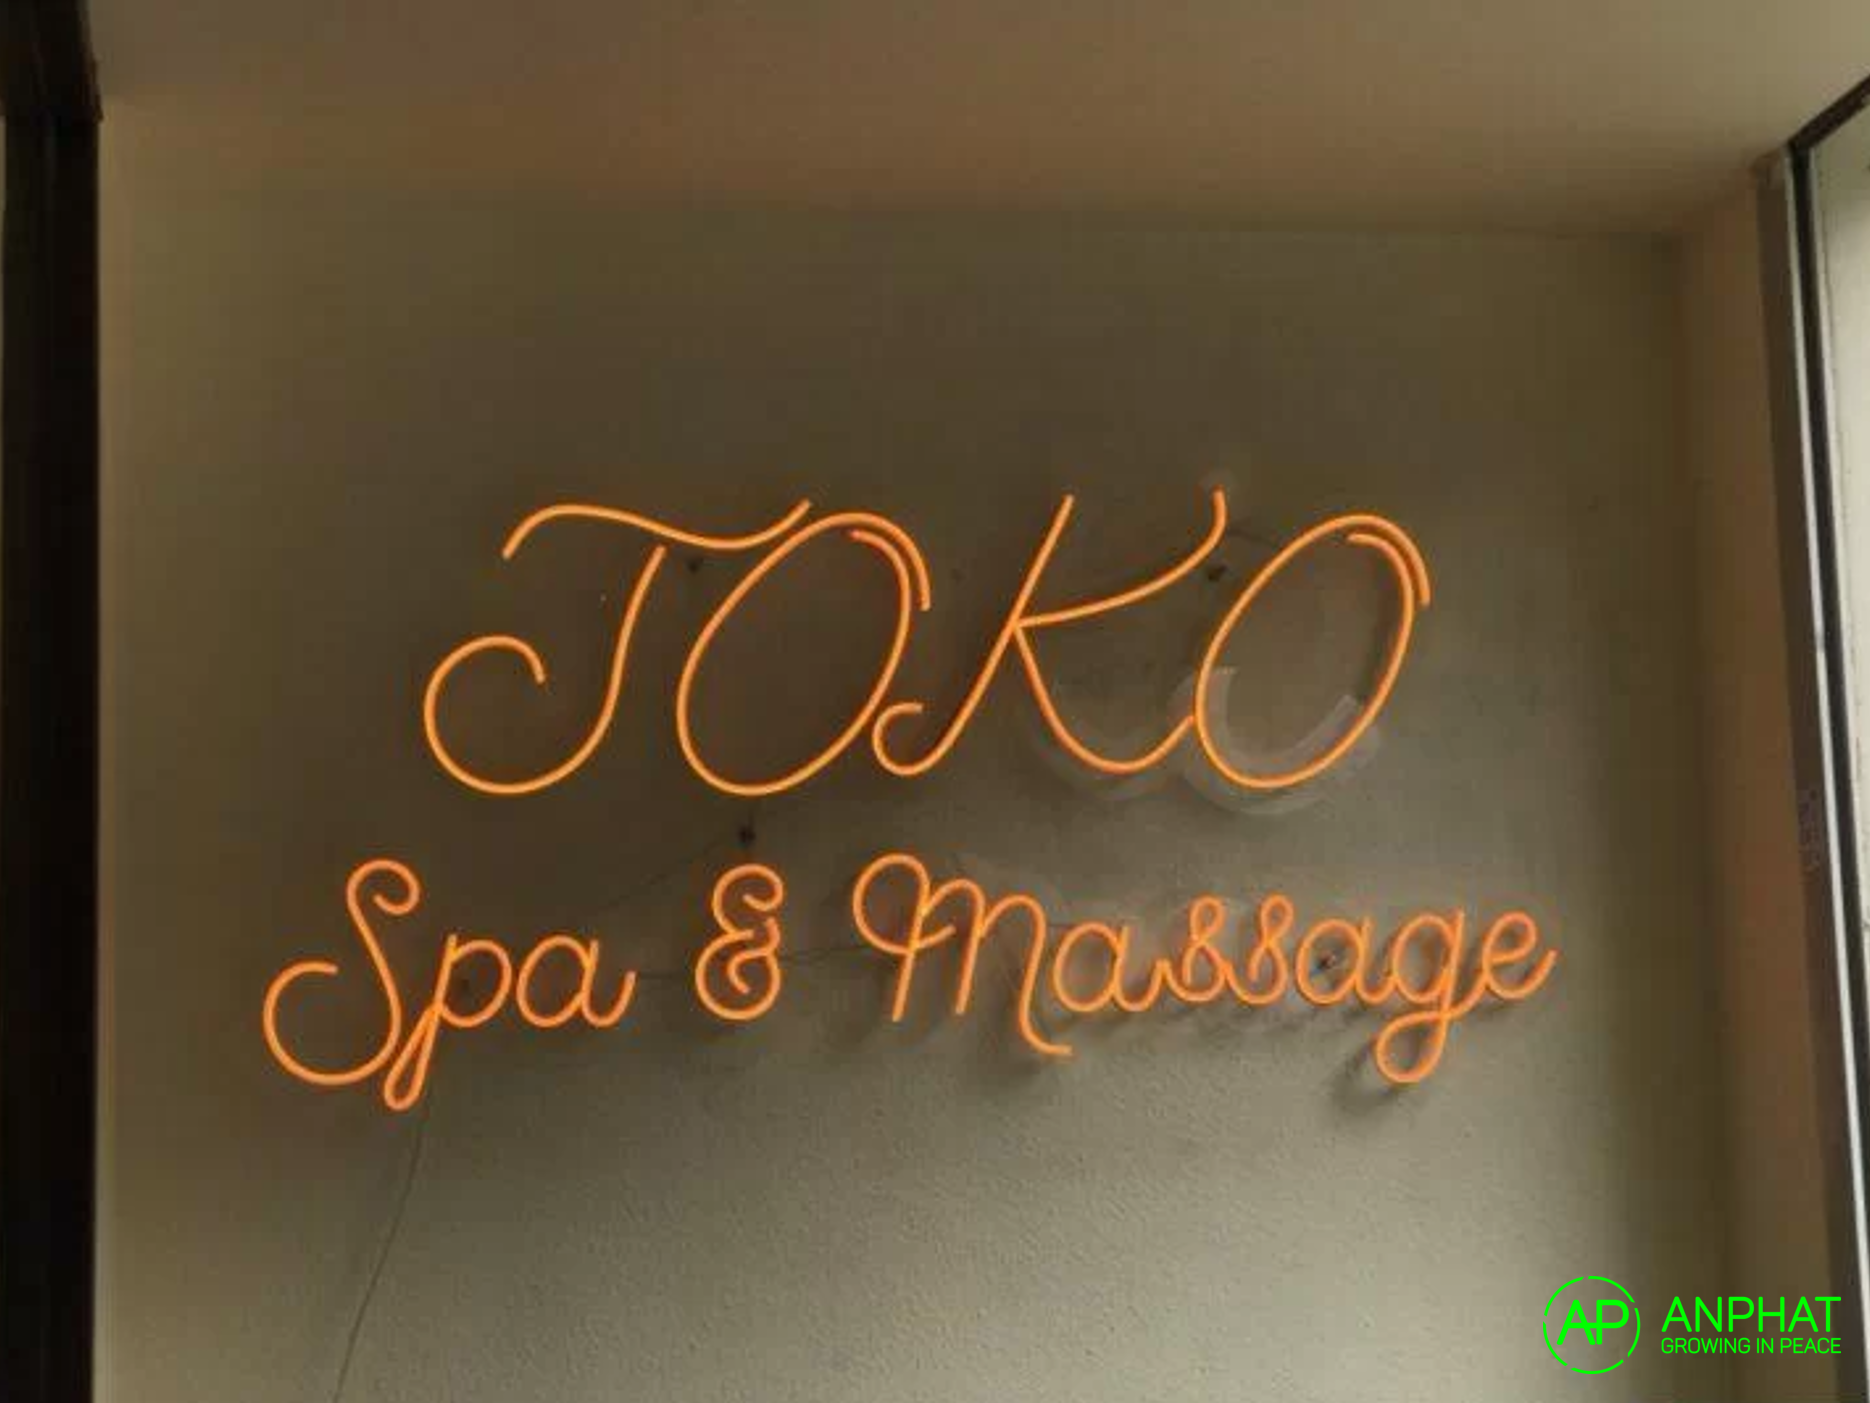 Decorative advertising sign for Spas and Nail salons